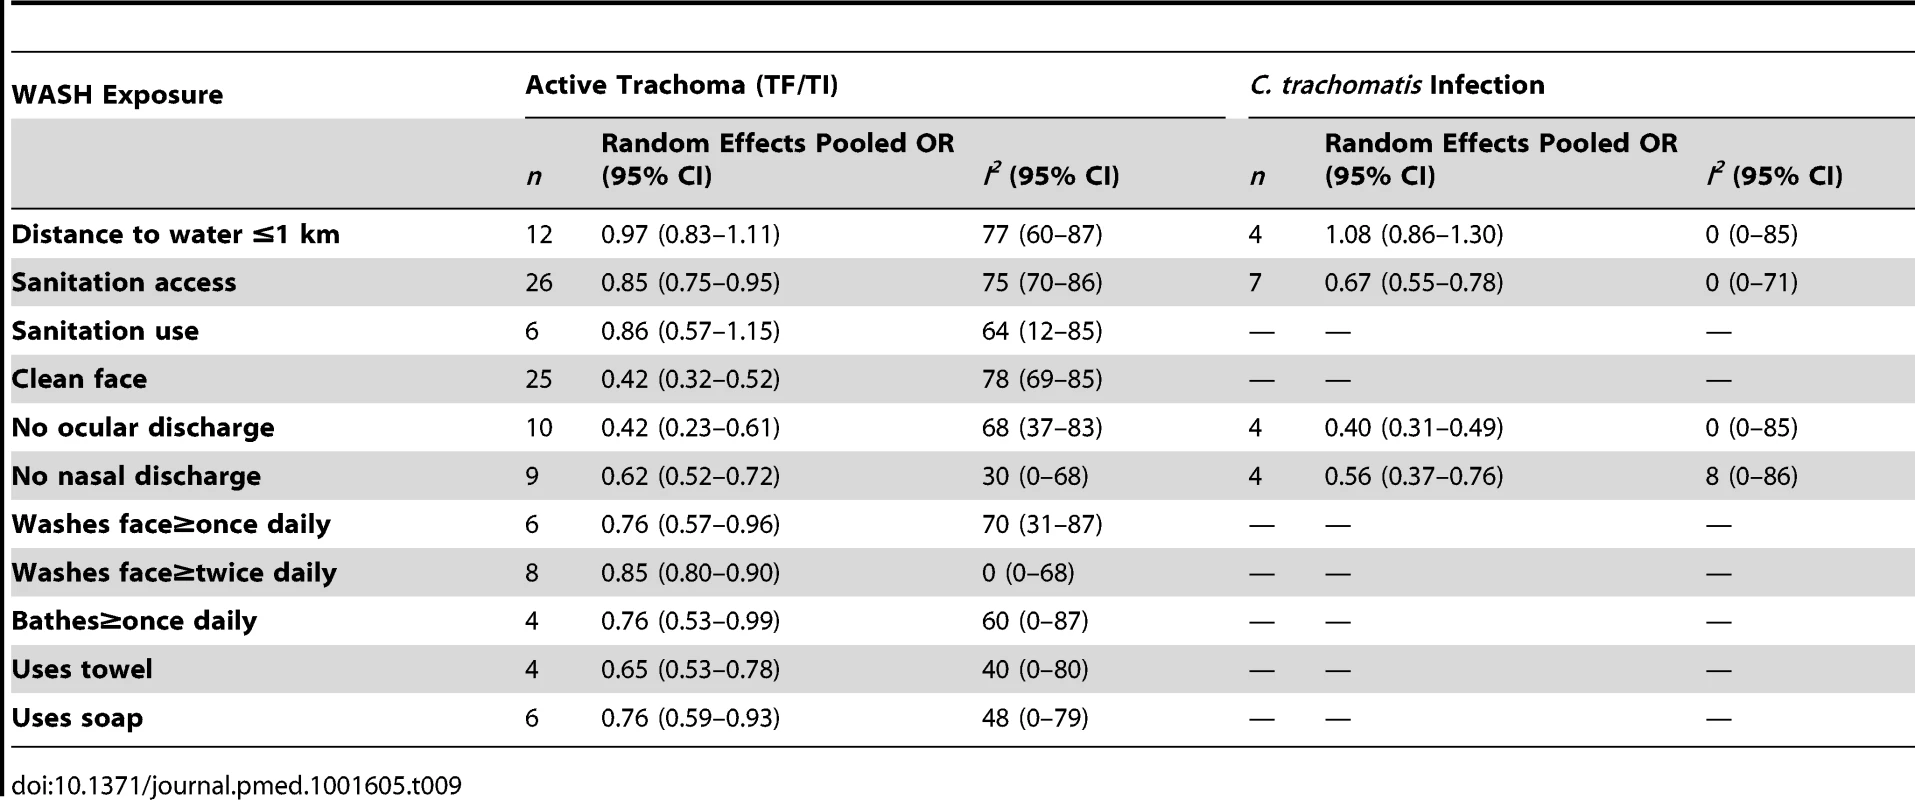 Summary of meta-analyses examining association of WASH exposures with active trachoma (TF/TI) and &lt;i&gt;C. trachomatis&lt;/i&gt; infection.